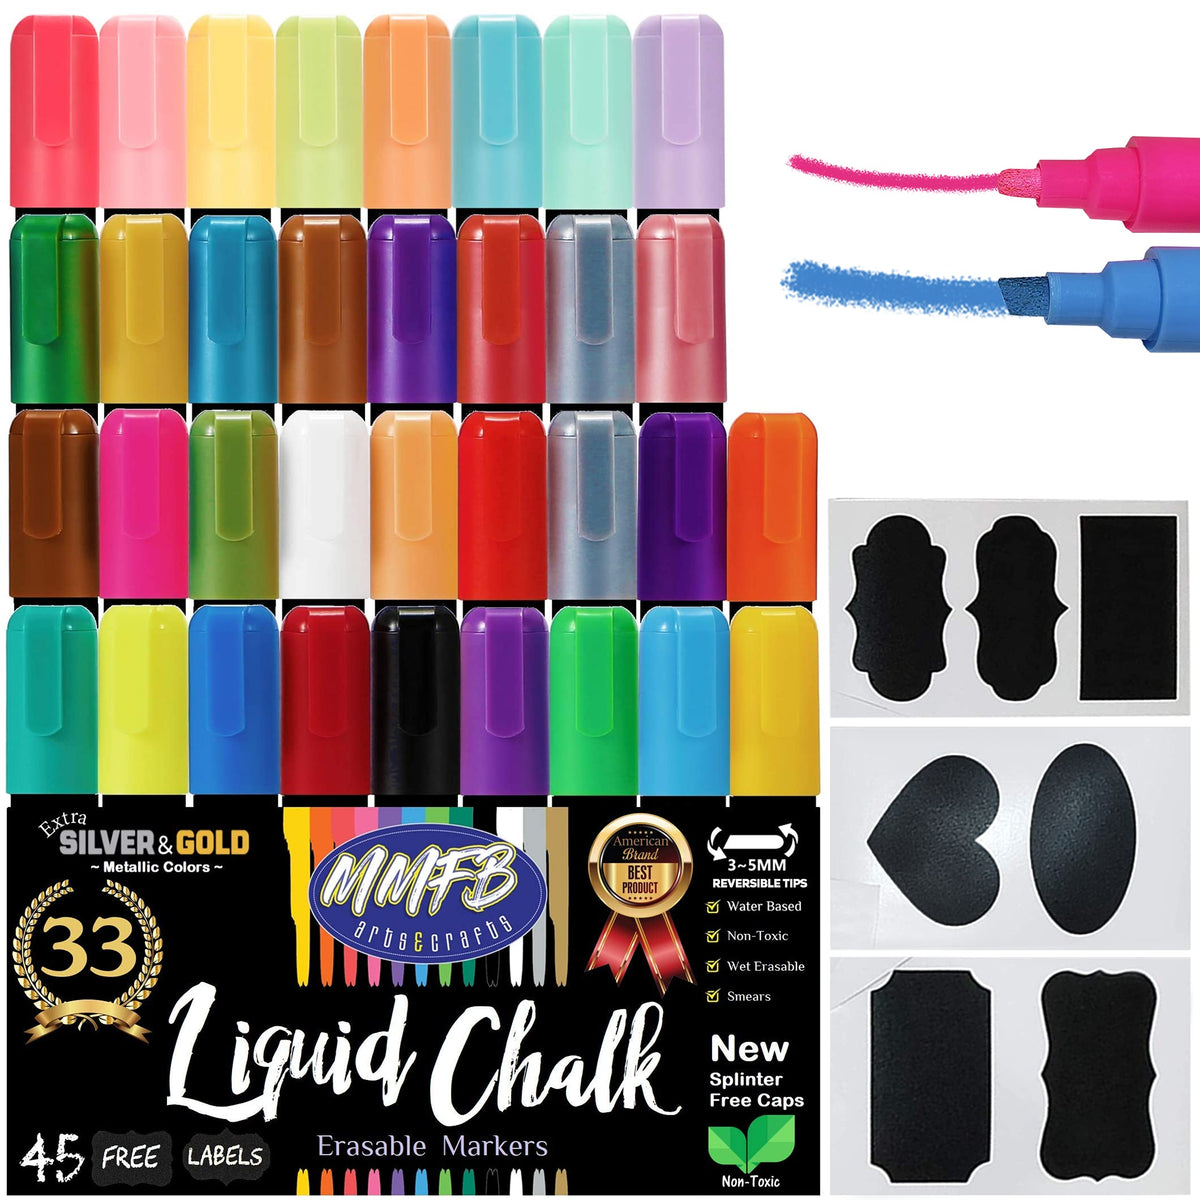 Glass Pen Window Marker: Liquid Chalk Markers for 1 Count (Pack of